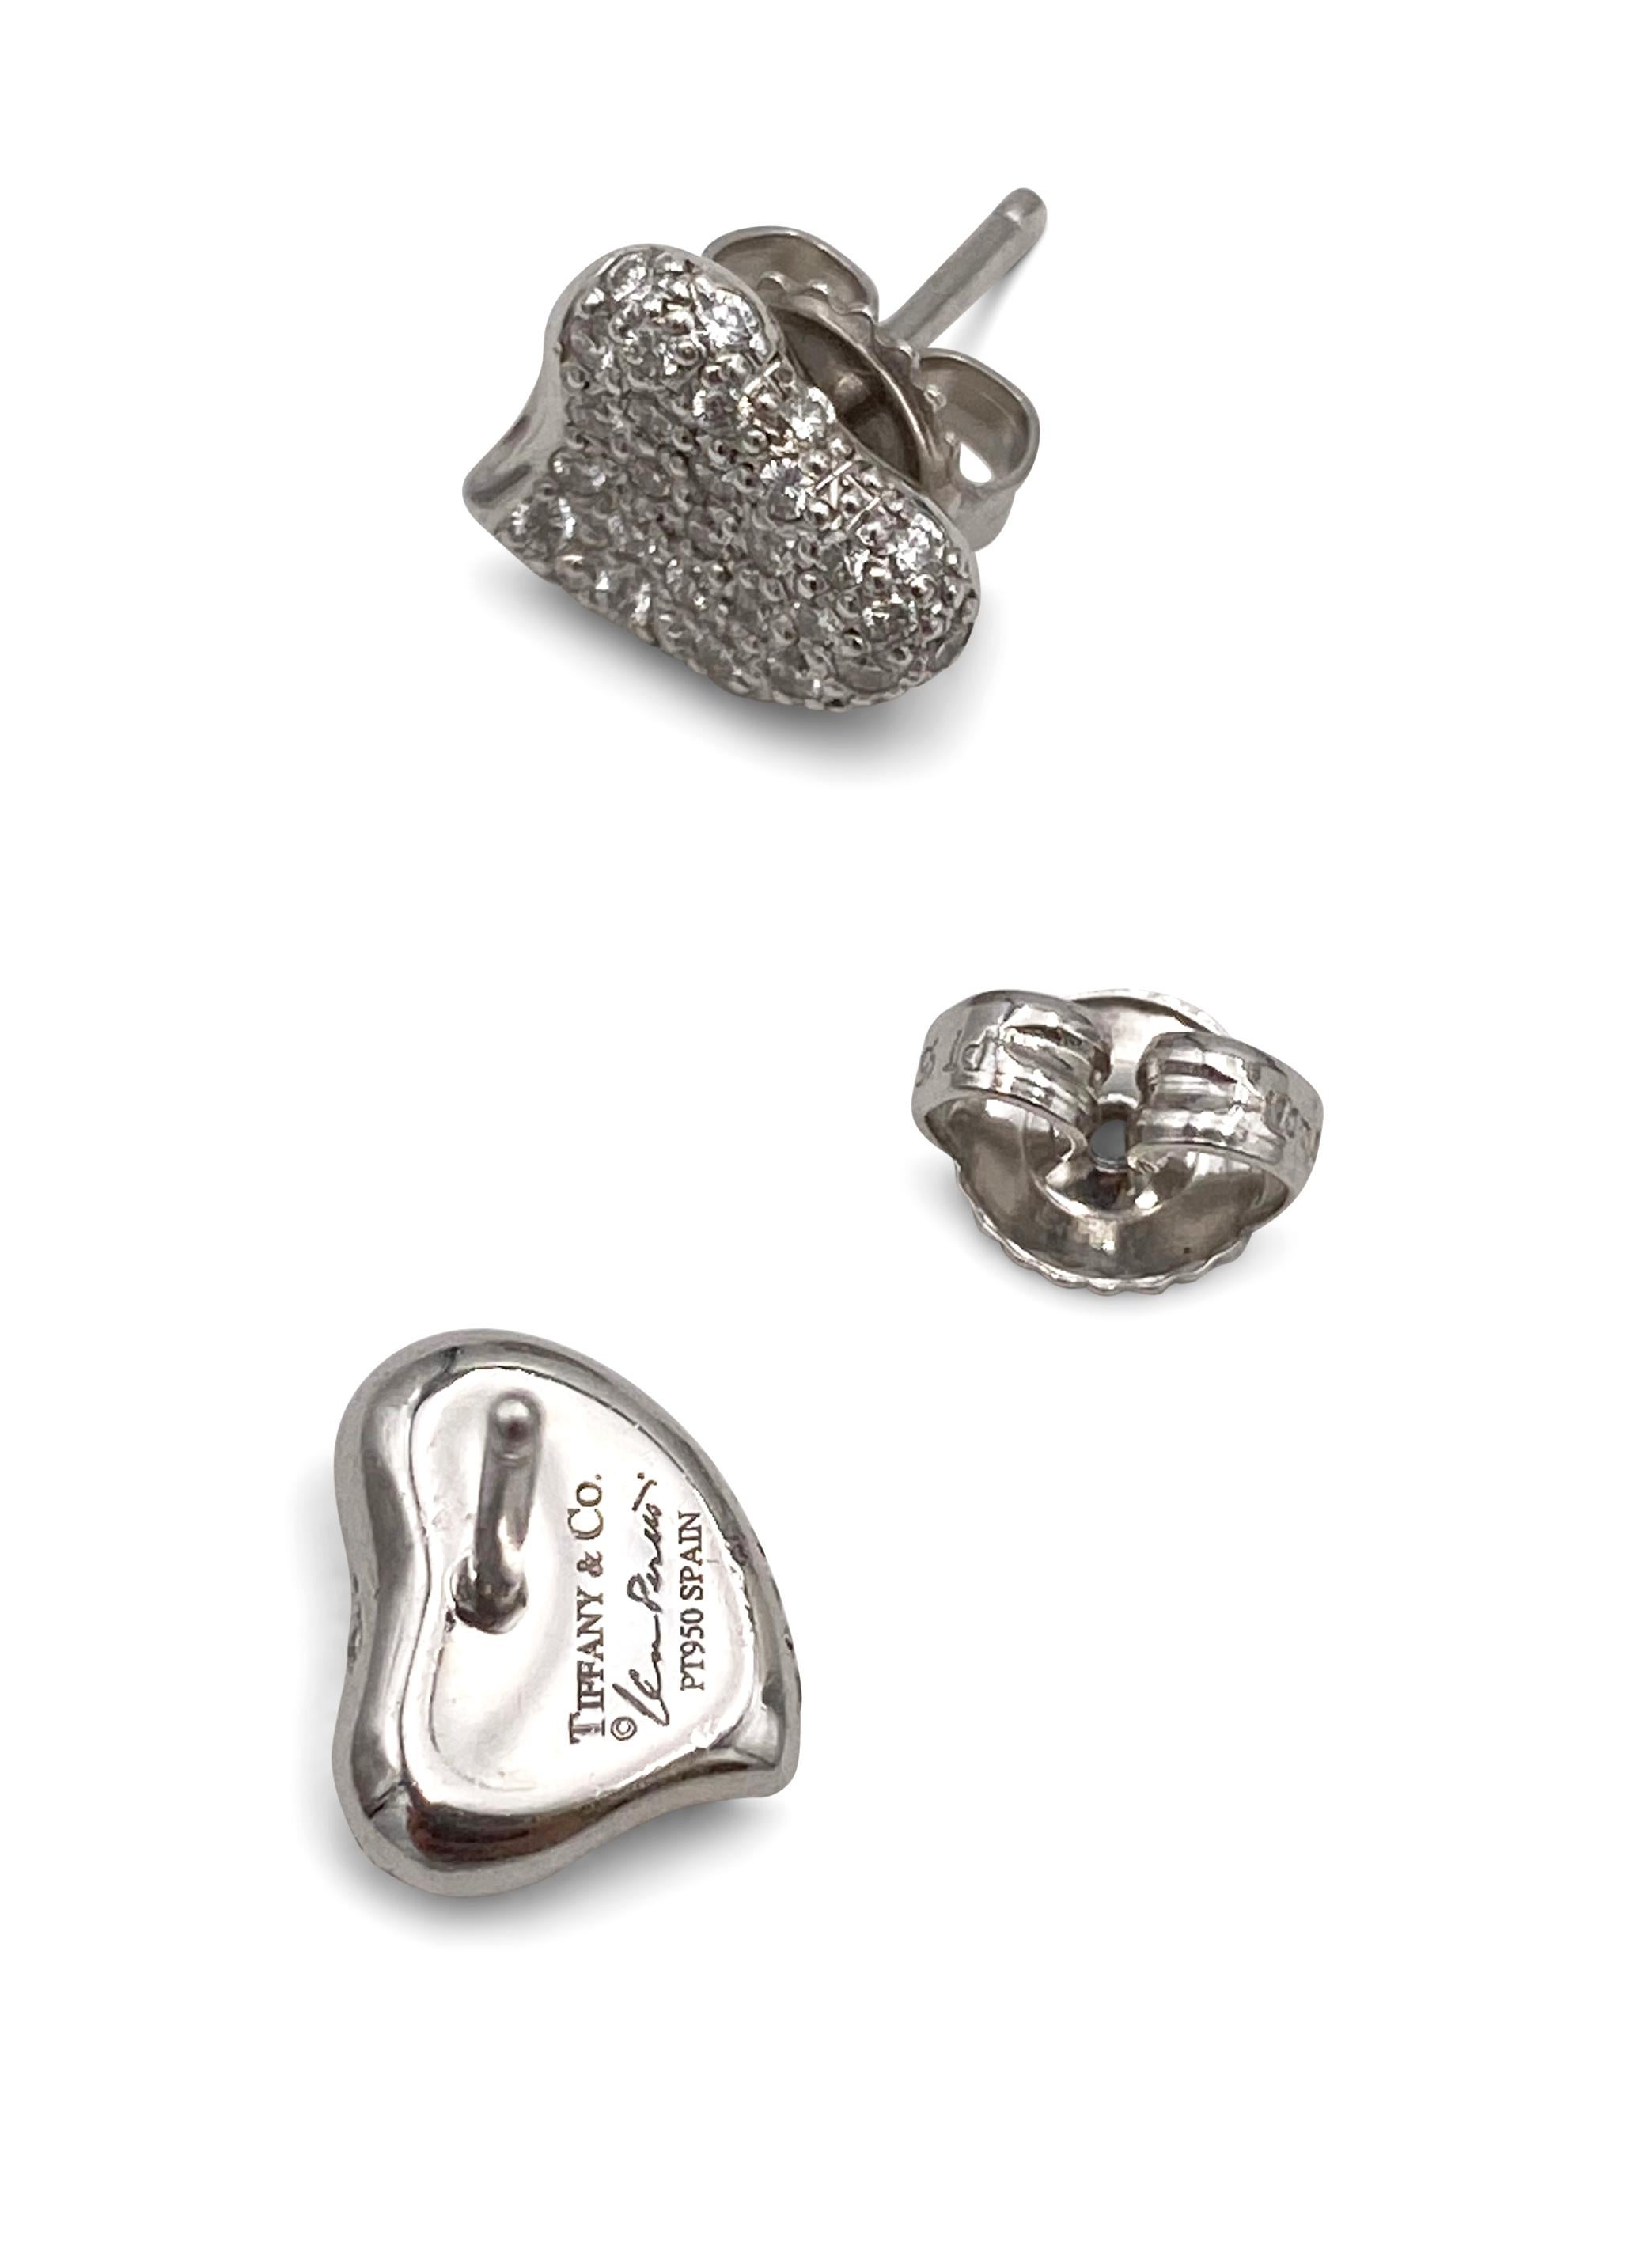 Authentic Elsa Peretti for Tiffany & Co. 'full heart' earrings crafted in platinum and pave set with an estimated 0.70 carats of round brilliant cut diamonds (E-F color, VS clarity). Signed Tiffany & Co., Elsa Peretti, PT950, Spain. The earrings are